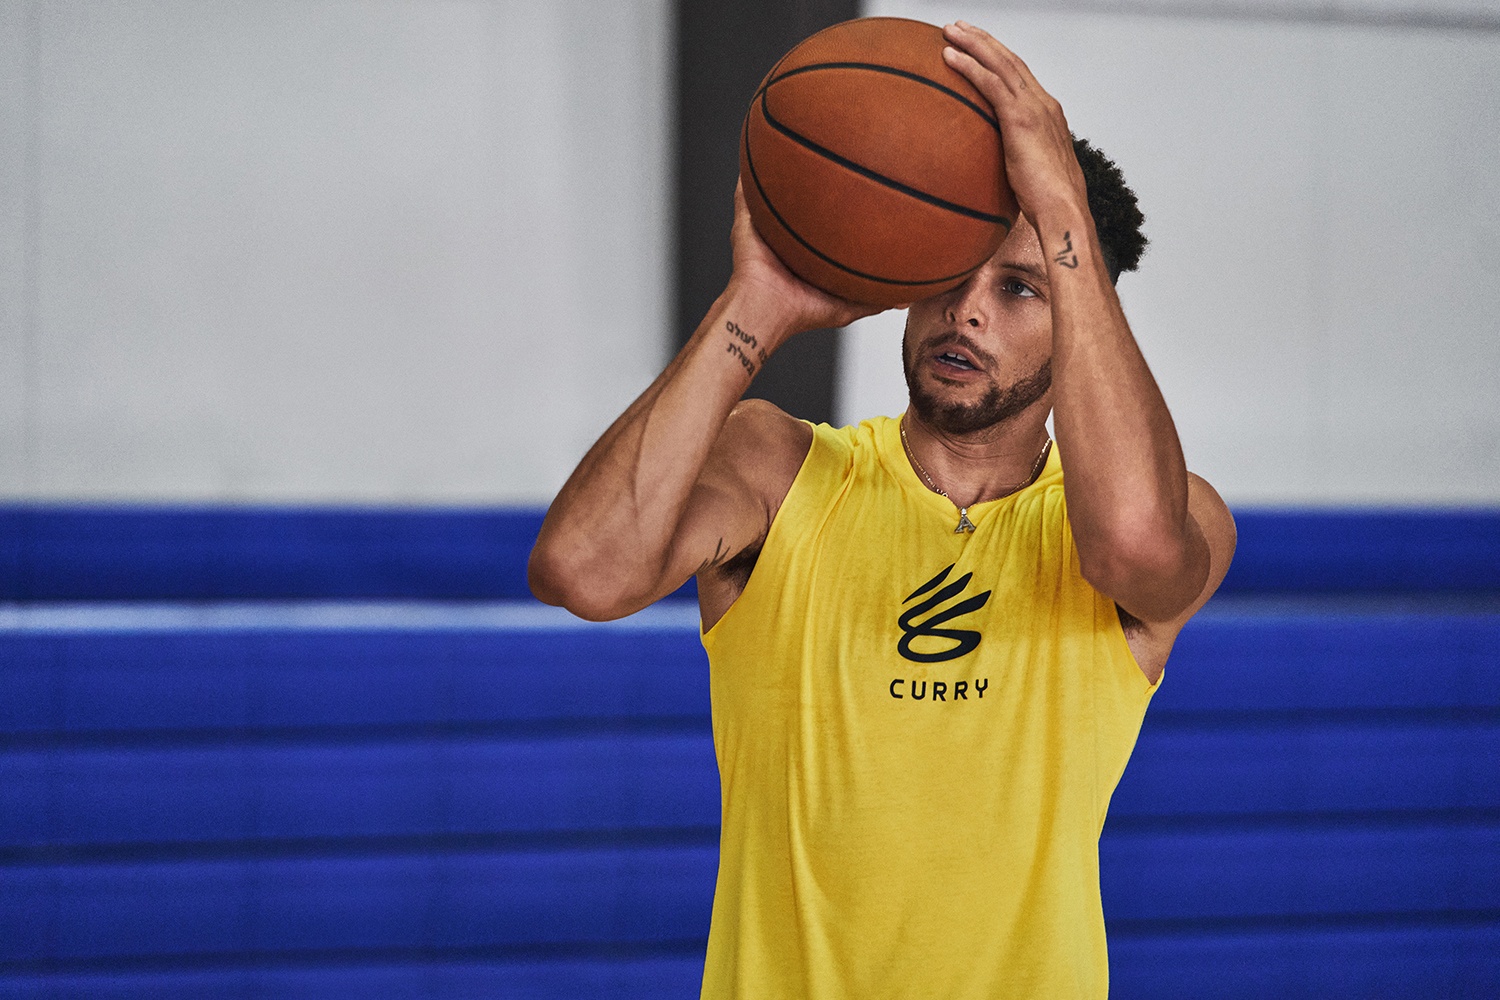 perfume Faceta Más temprano Under Armour launches brand with NBA star Steph Curry to rival Nike's Jordan